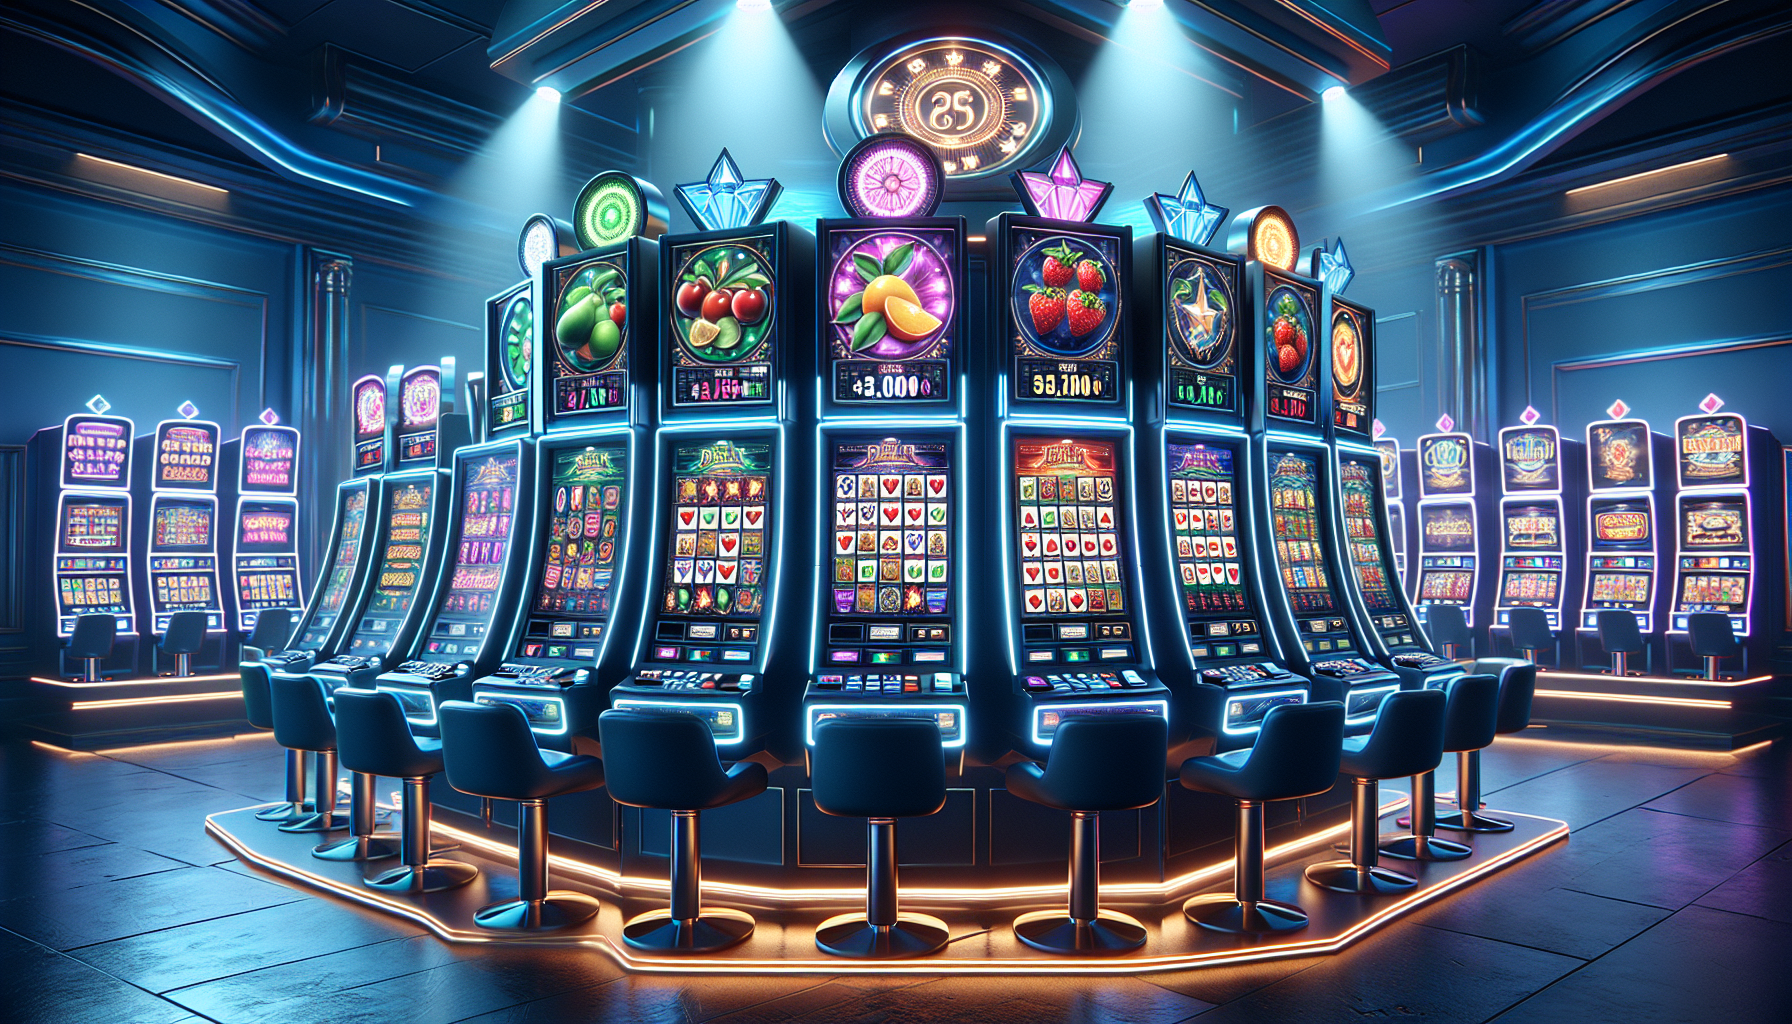 5 Stylish Ideas For Your Cultural Influences on Gambling Preferences in Turkey